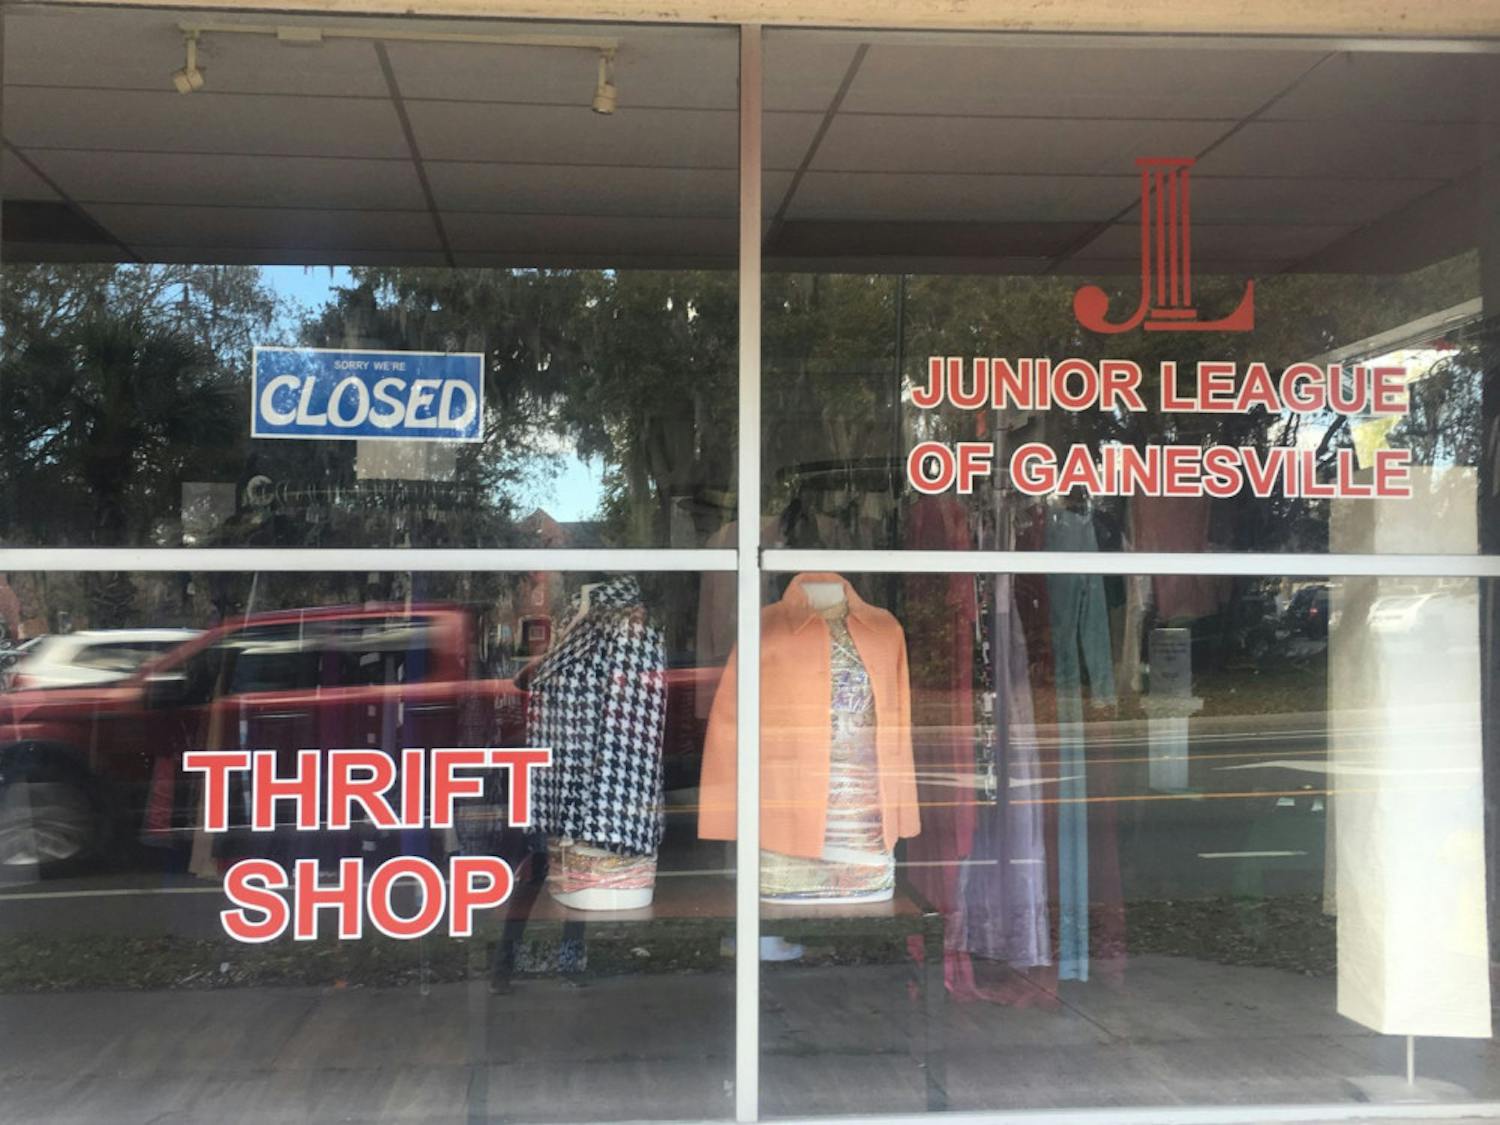 The Junior League of Gainesville Thrift Shop,&nbsp;located at 430 N. Main St.